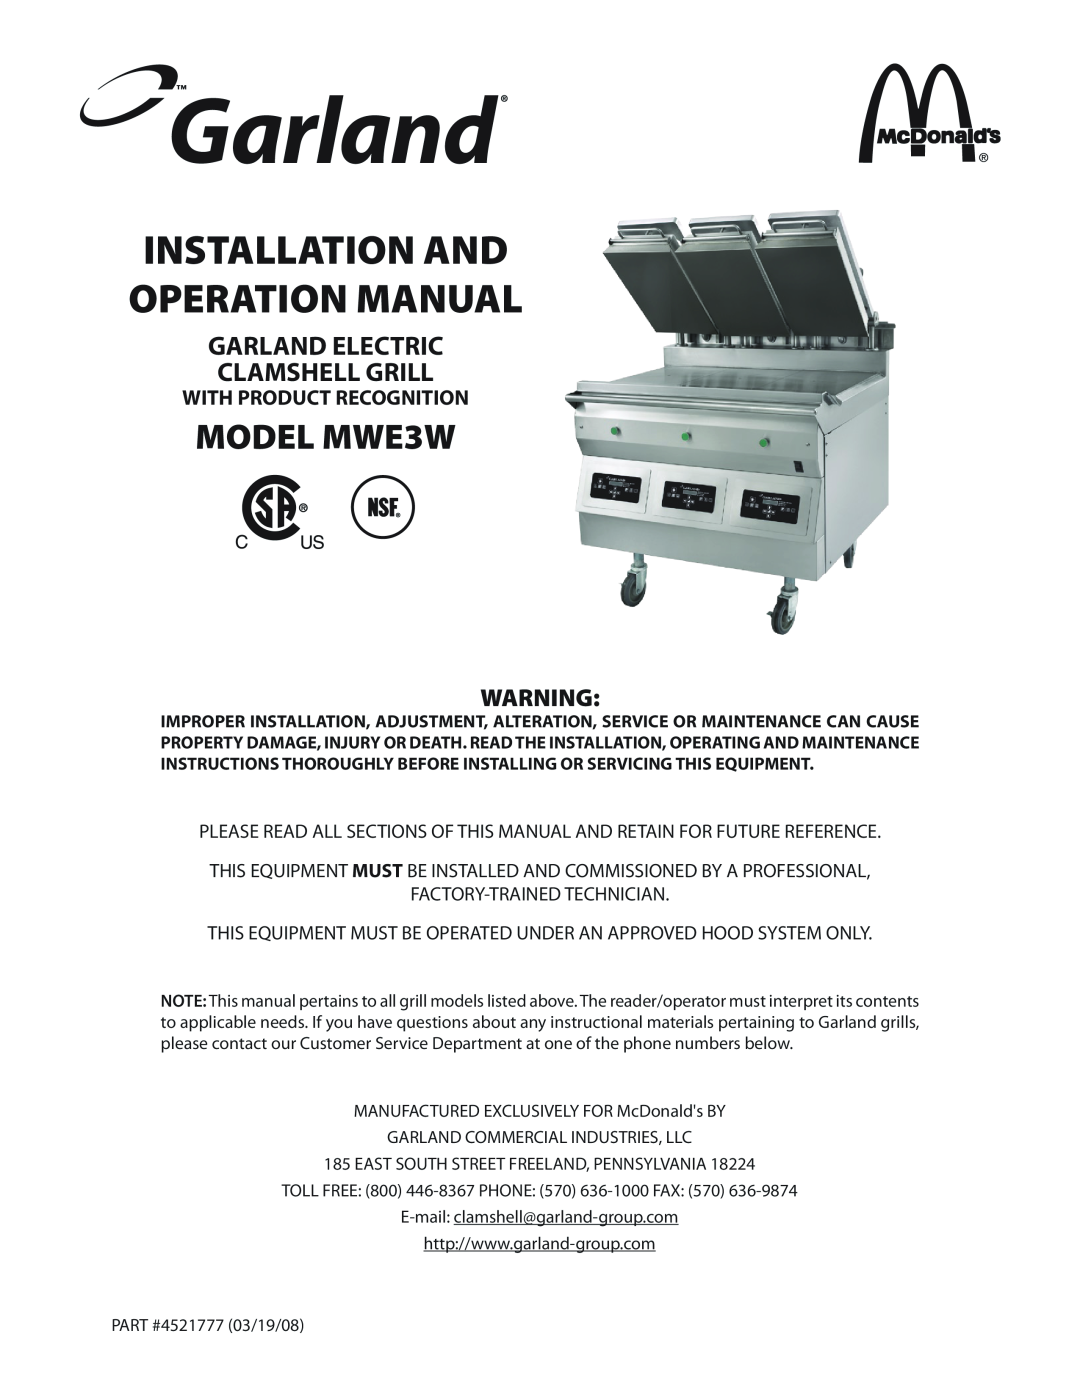 Garland MWE3W manual Cleaning of Clamshell Grill, Daily, To maintain grill cleanliness and food safety, Time of day 